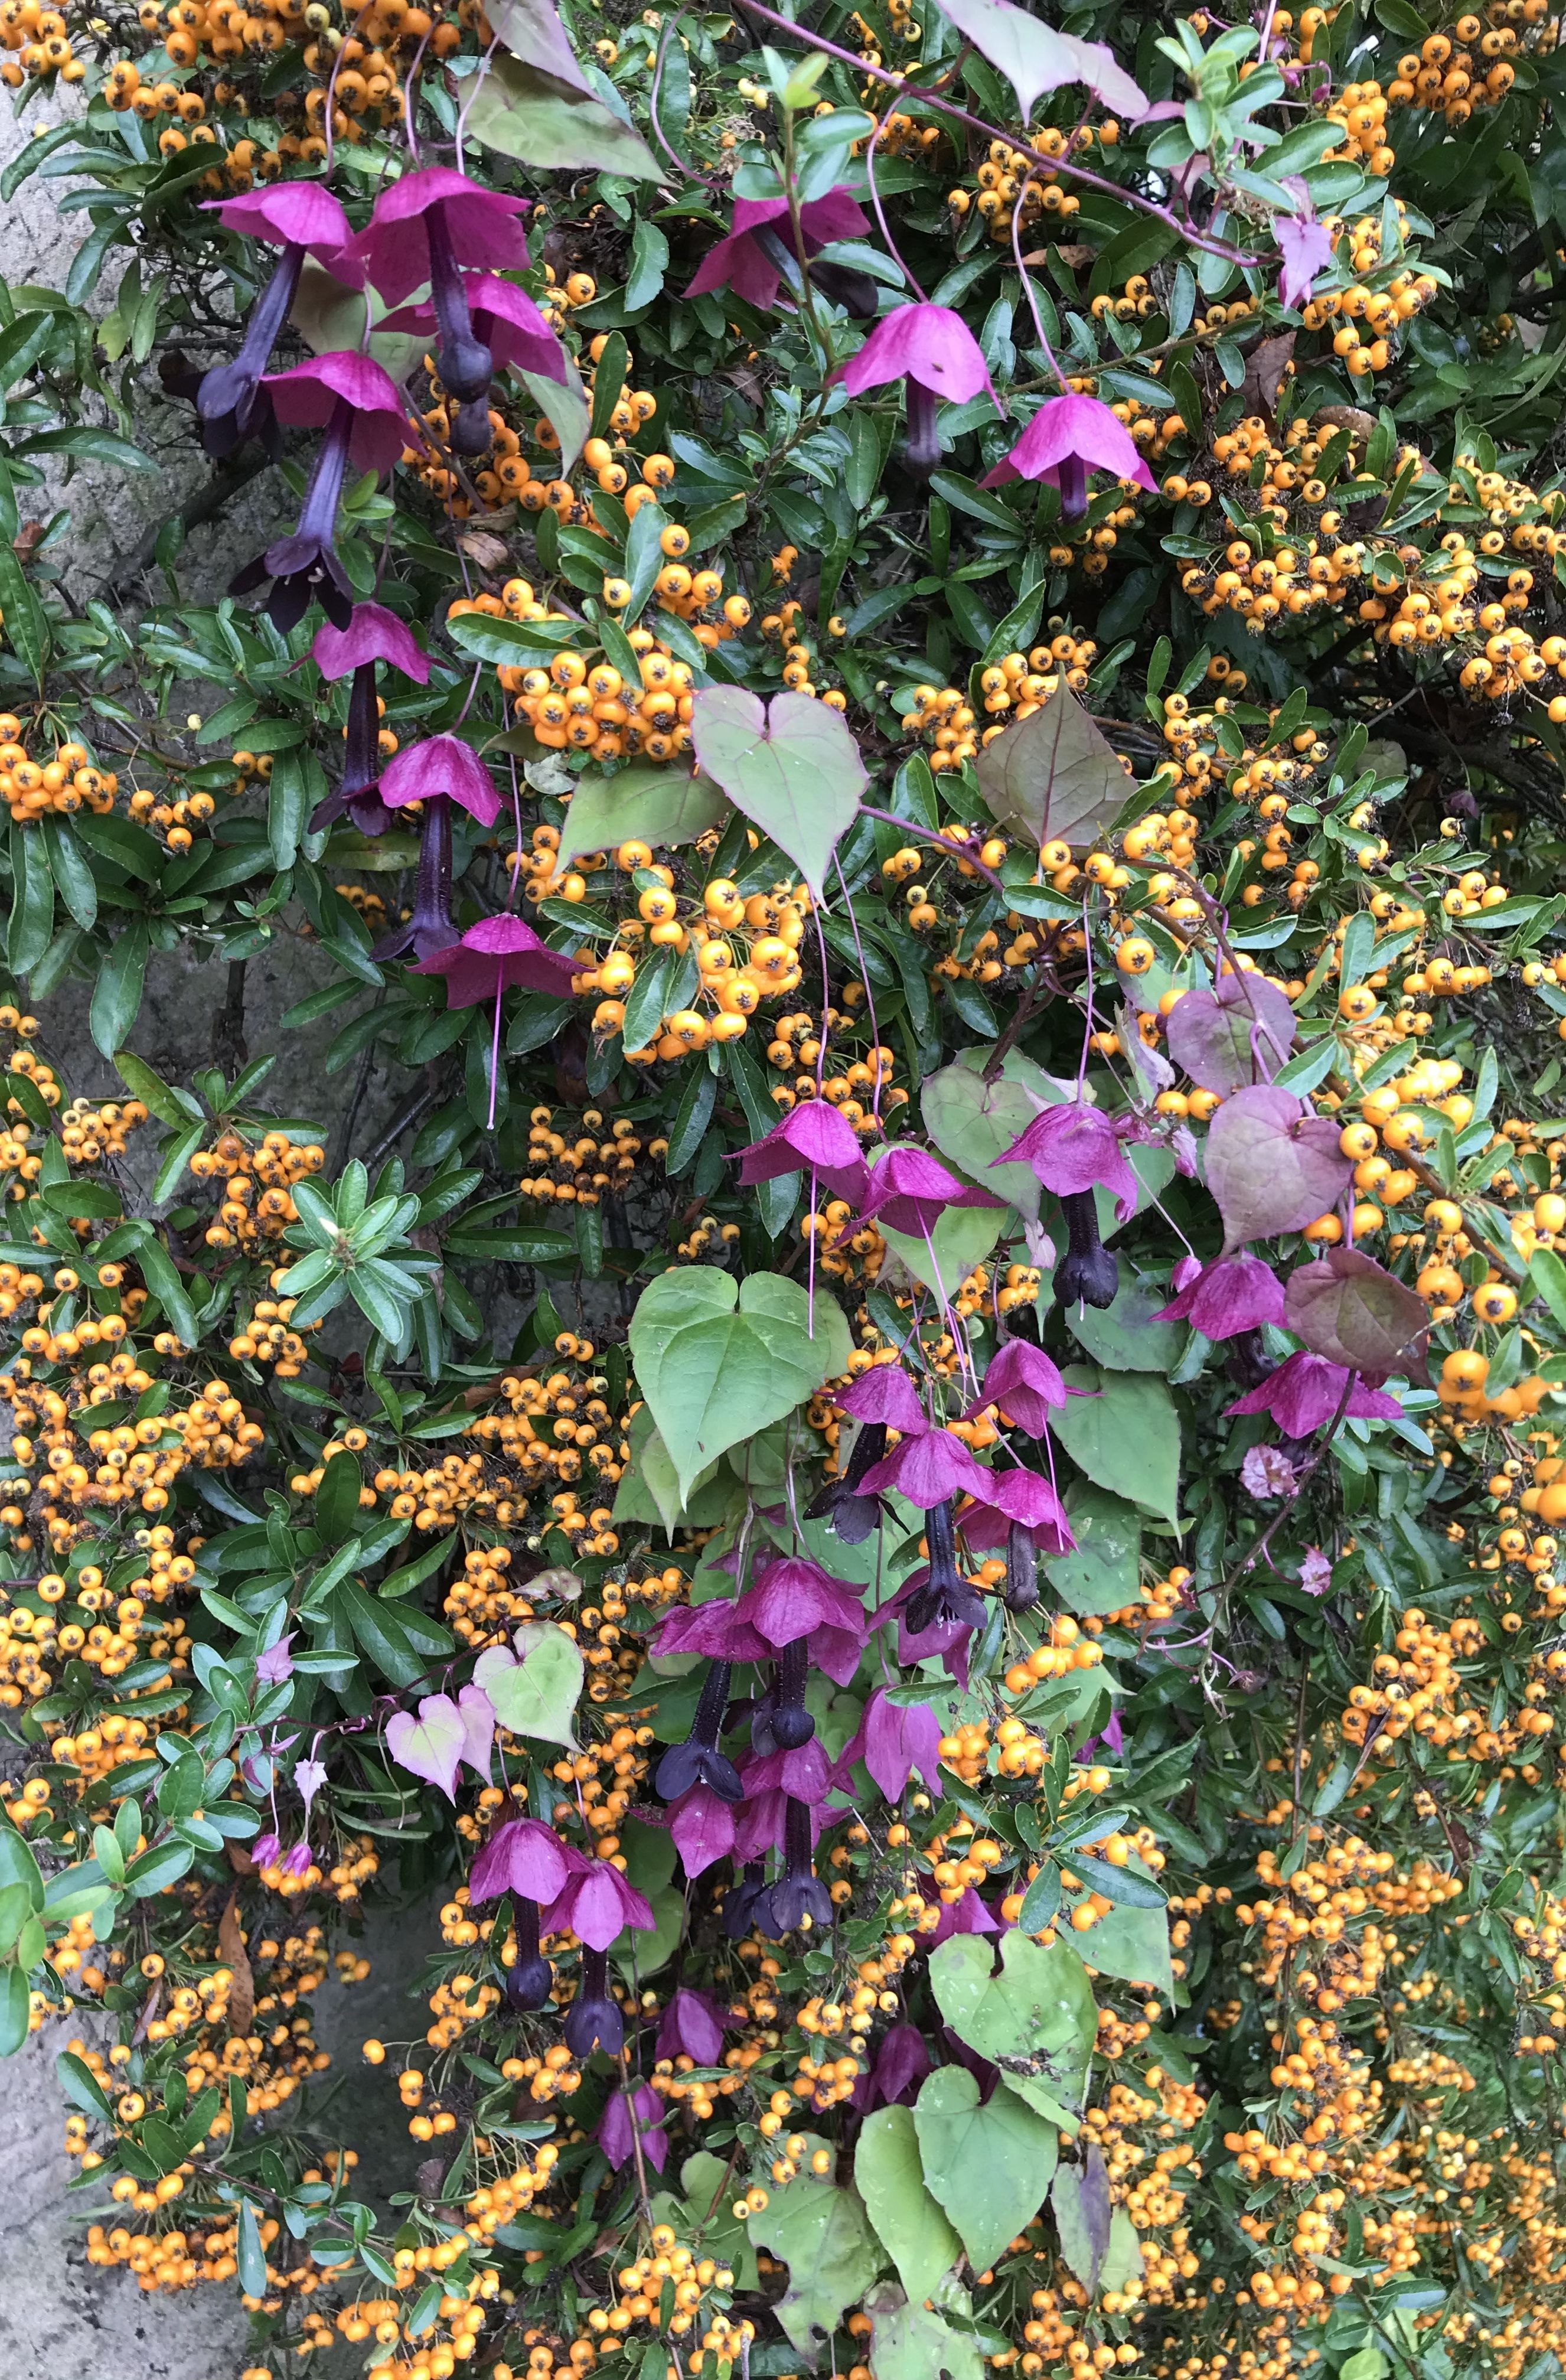 purple and green leaves cascading down amongst small orange berries